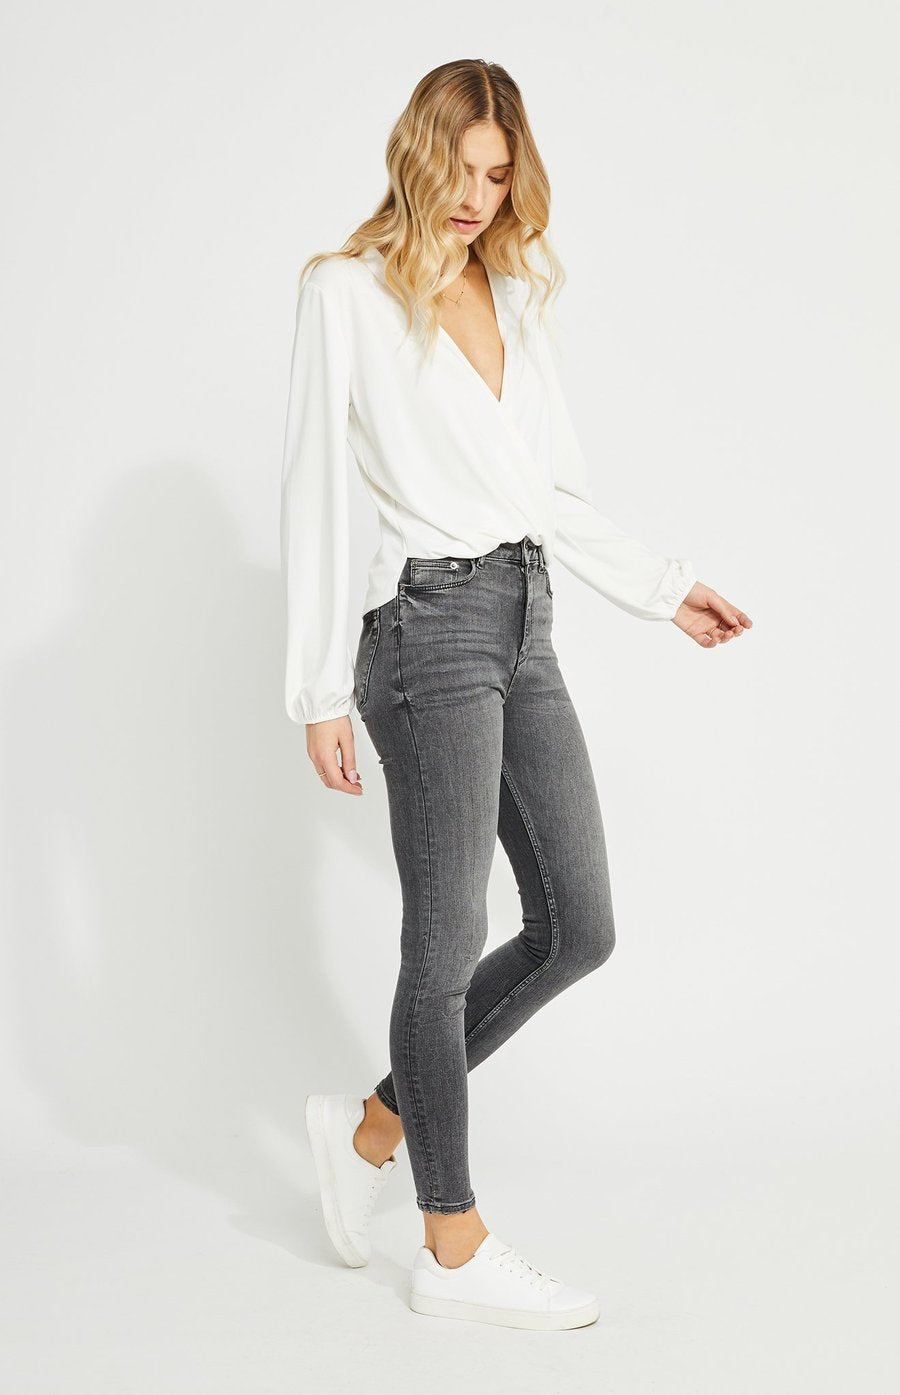 "Leah" Top in White by Gentle Fawn